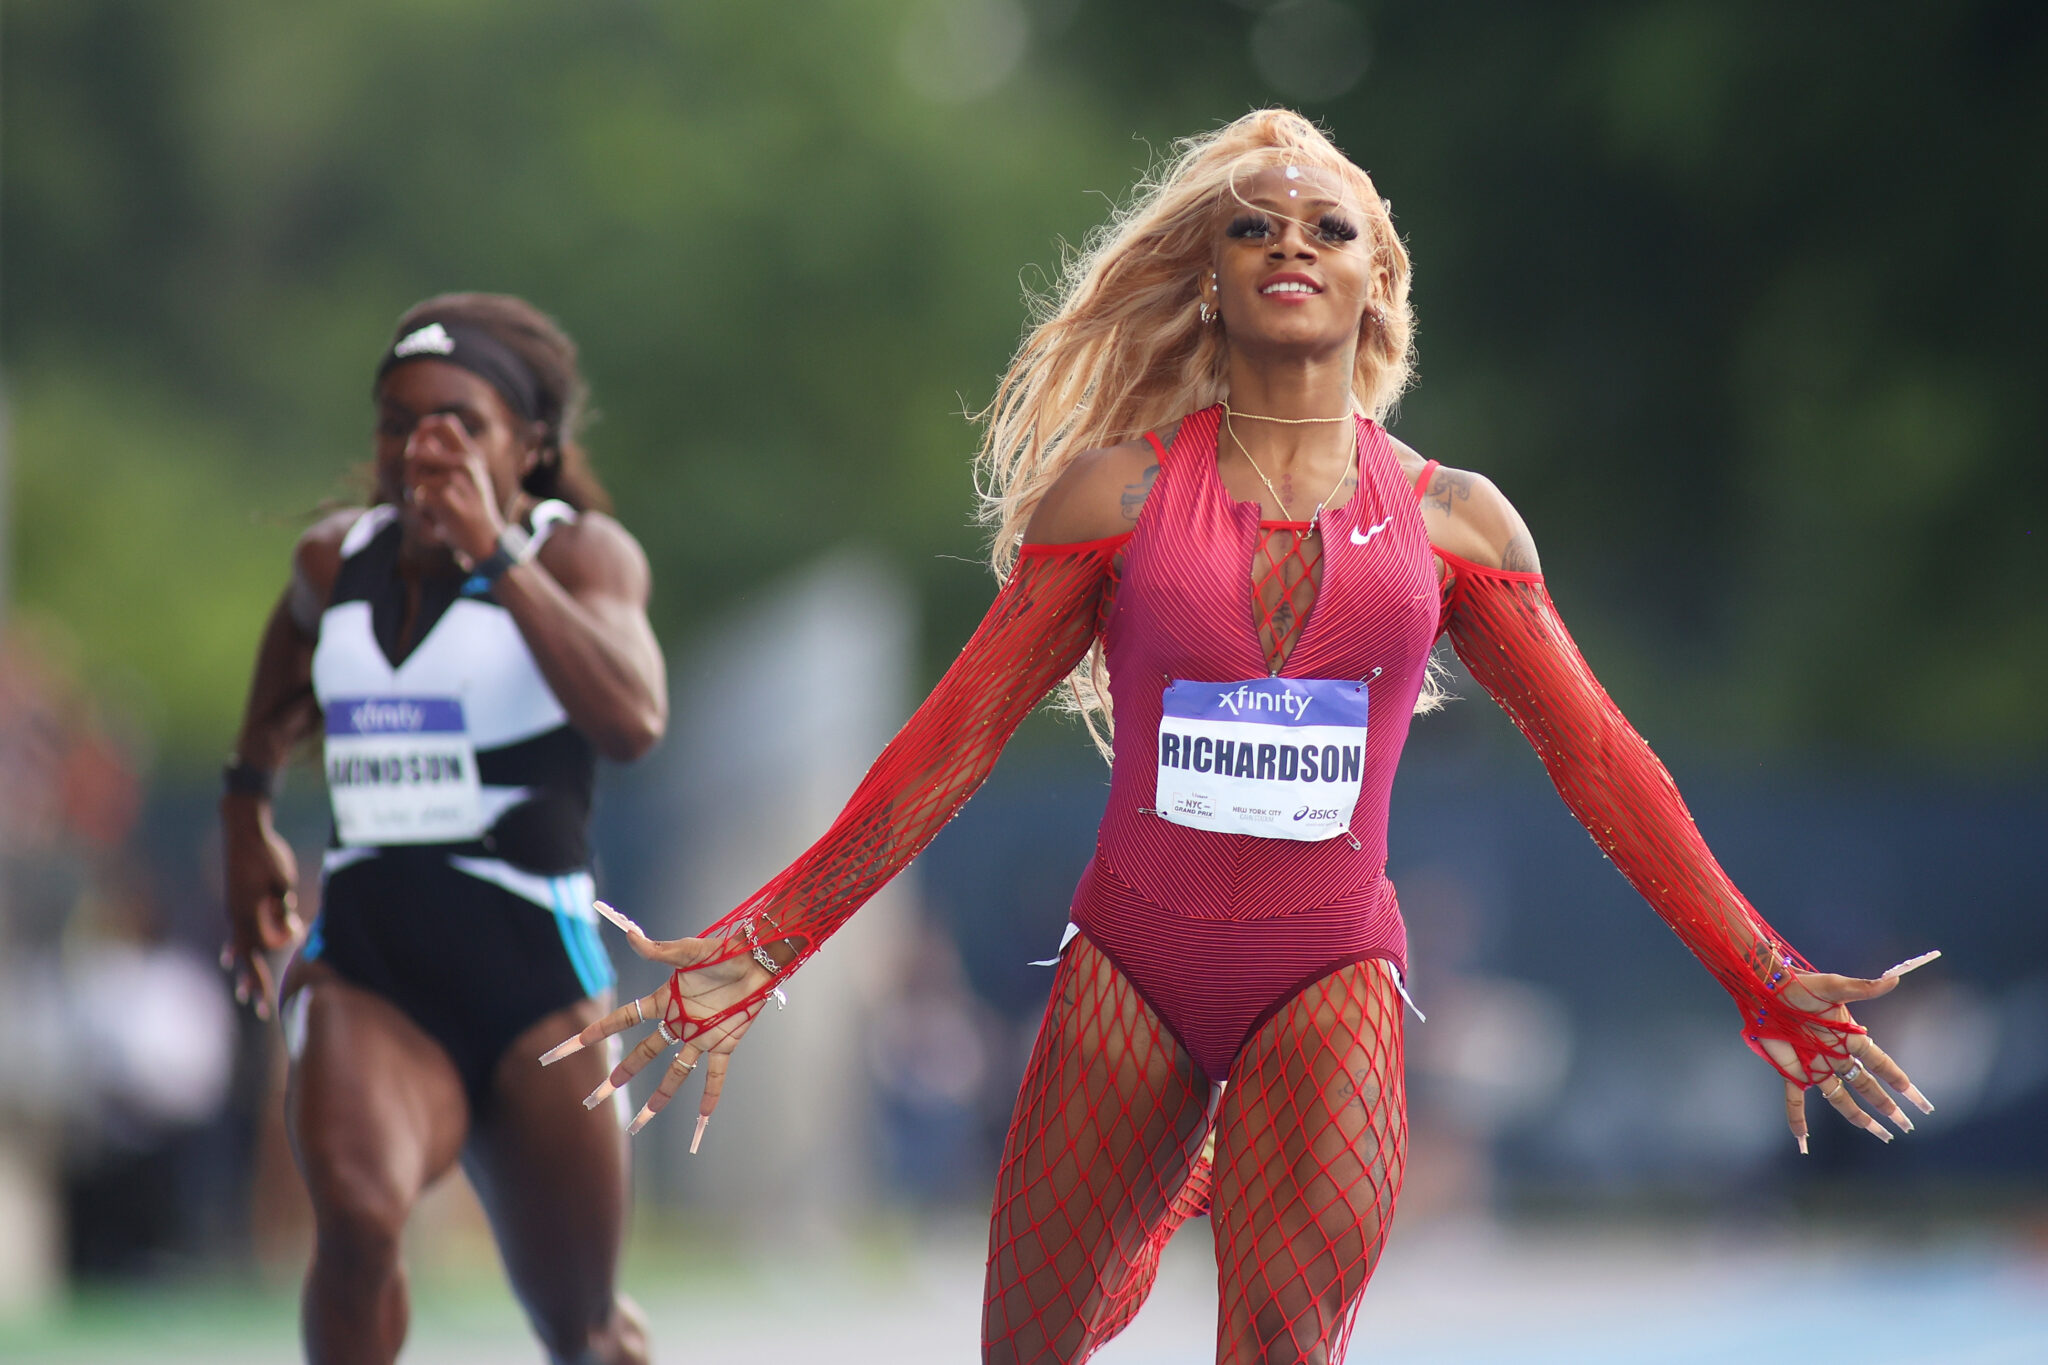 Sha'Carri Richardson May Have Won The 200m, but Her Pink Outfit